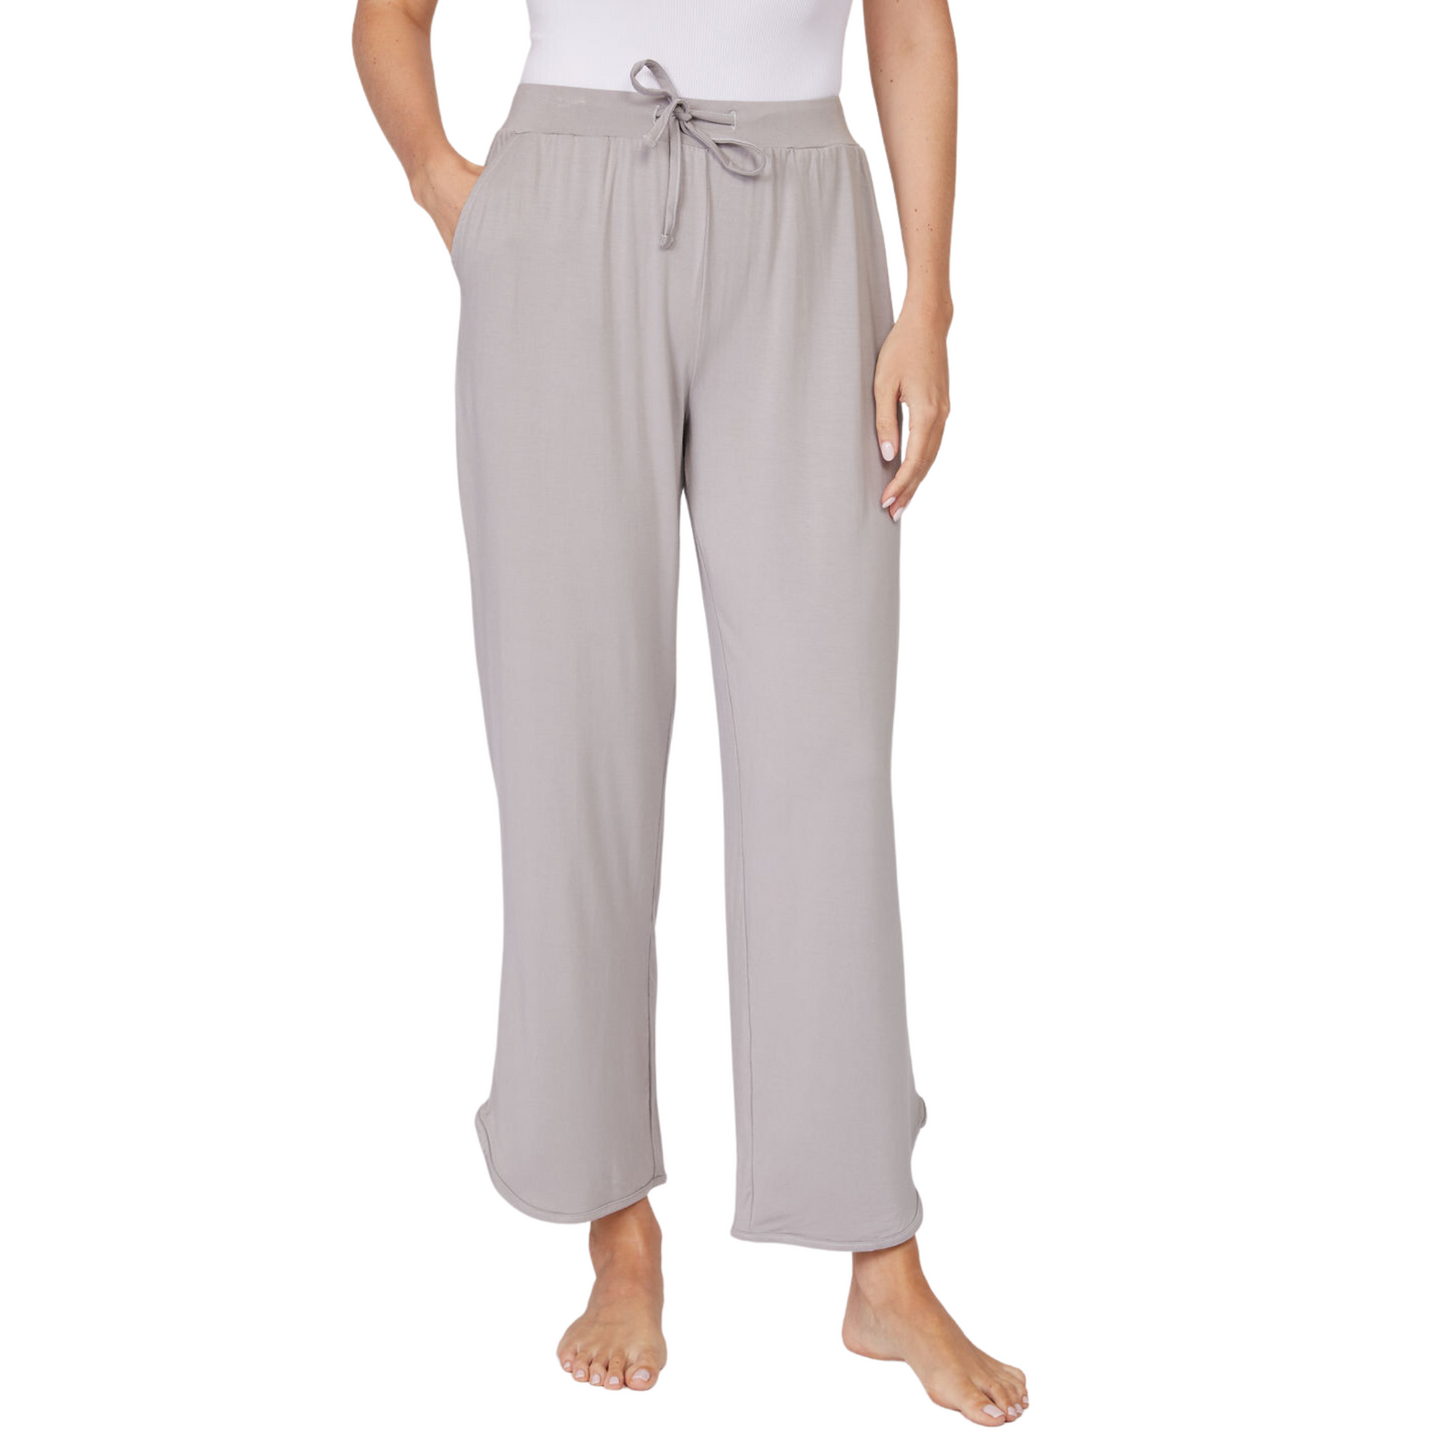 Super Soft Cropped Curve Jogger Pants made from Bamboo Viscose